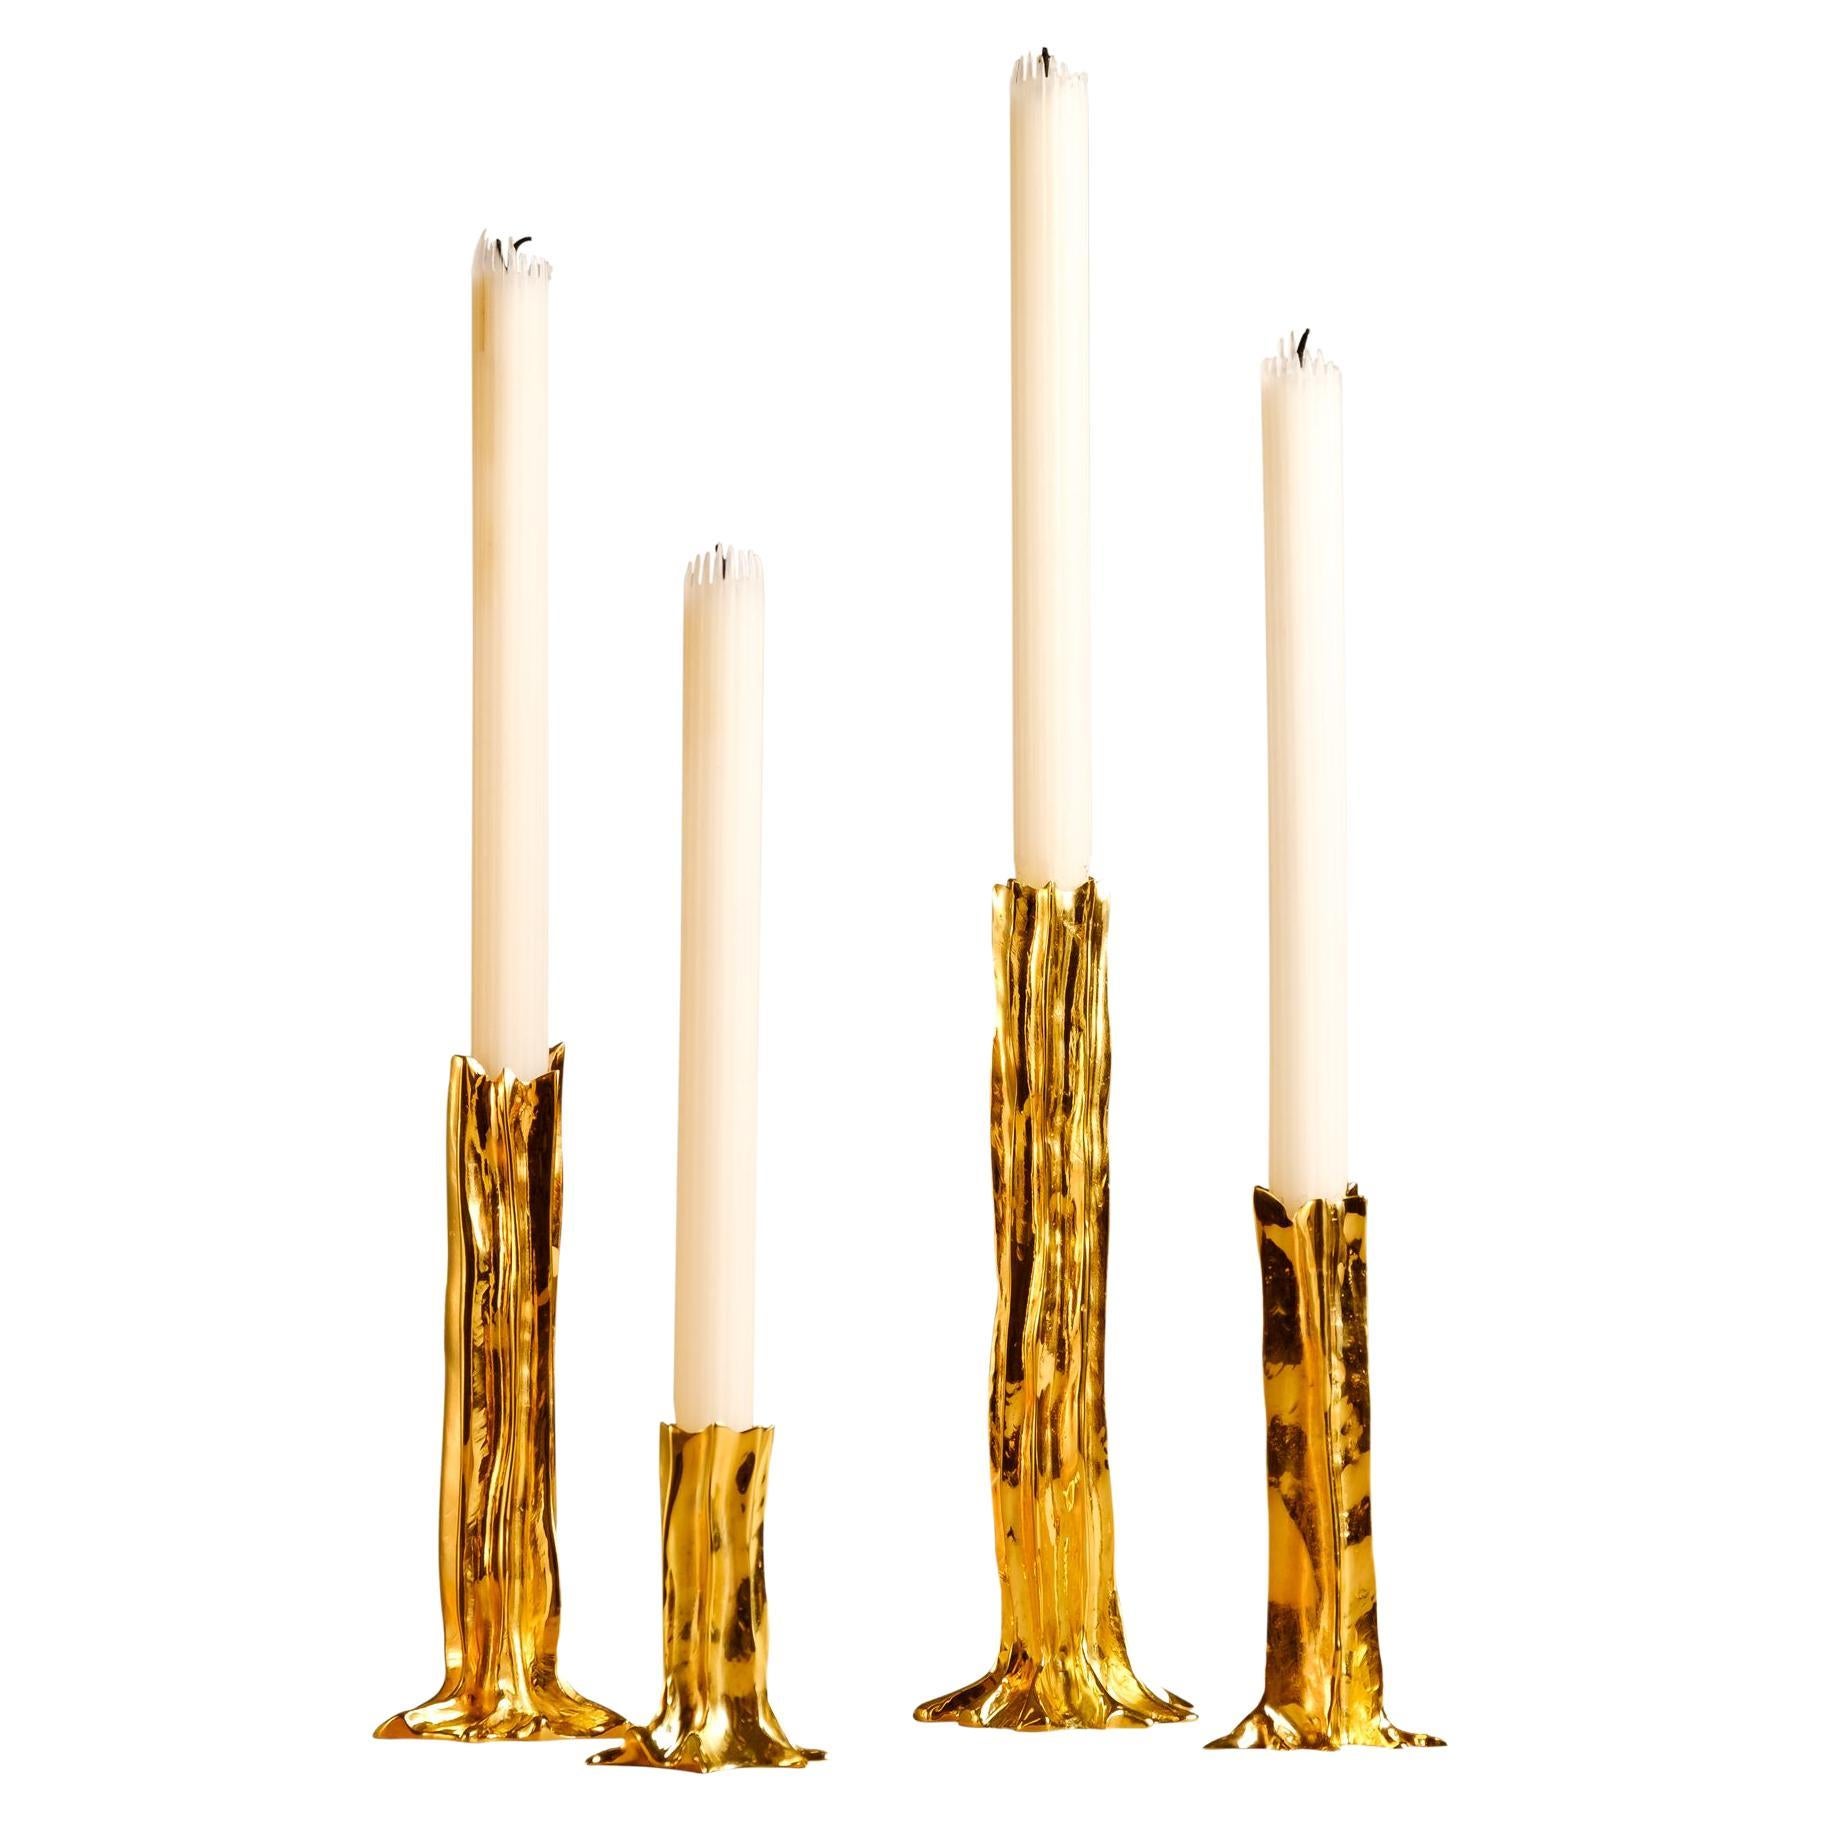 24k Gold Arbor 4 Piece-Set of Candlesticks by Studio Palatin For Sale